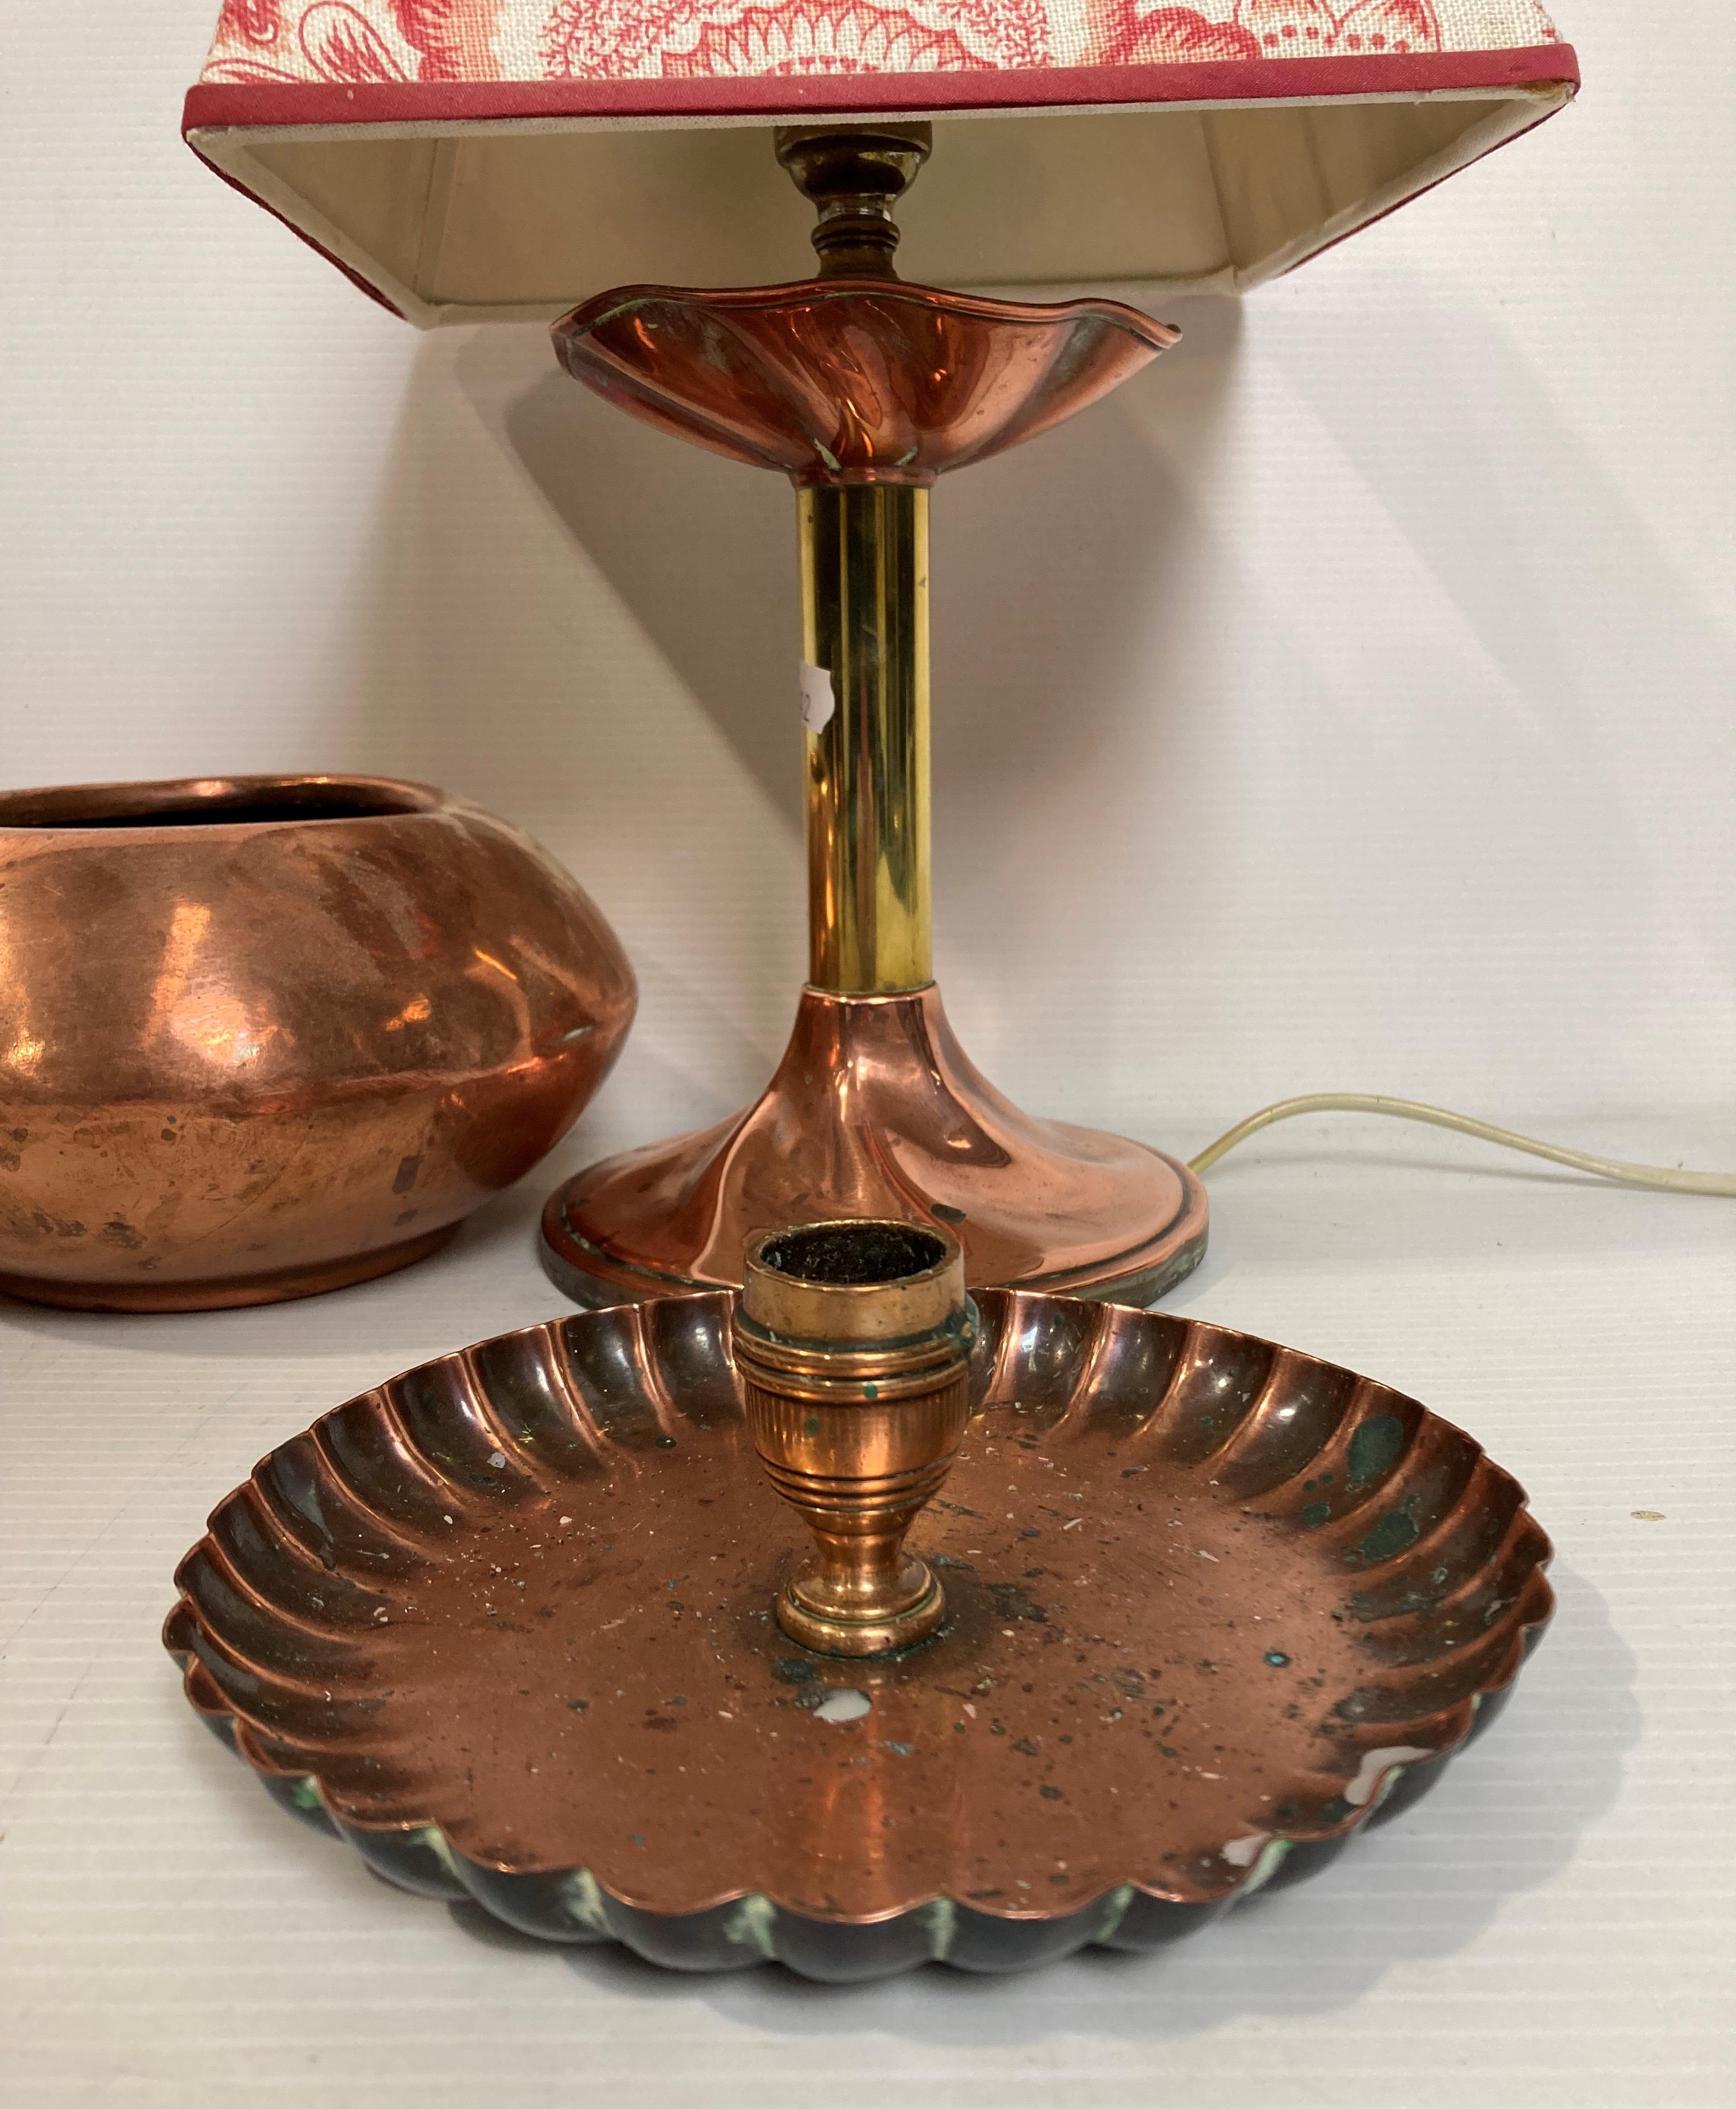 Arts & Crafts style copper and brass table lamp with flower-style collar, - Image 3 of 8